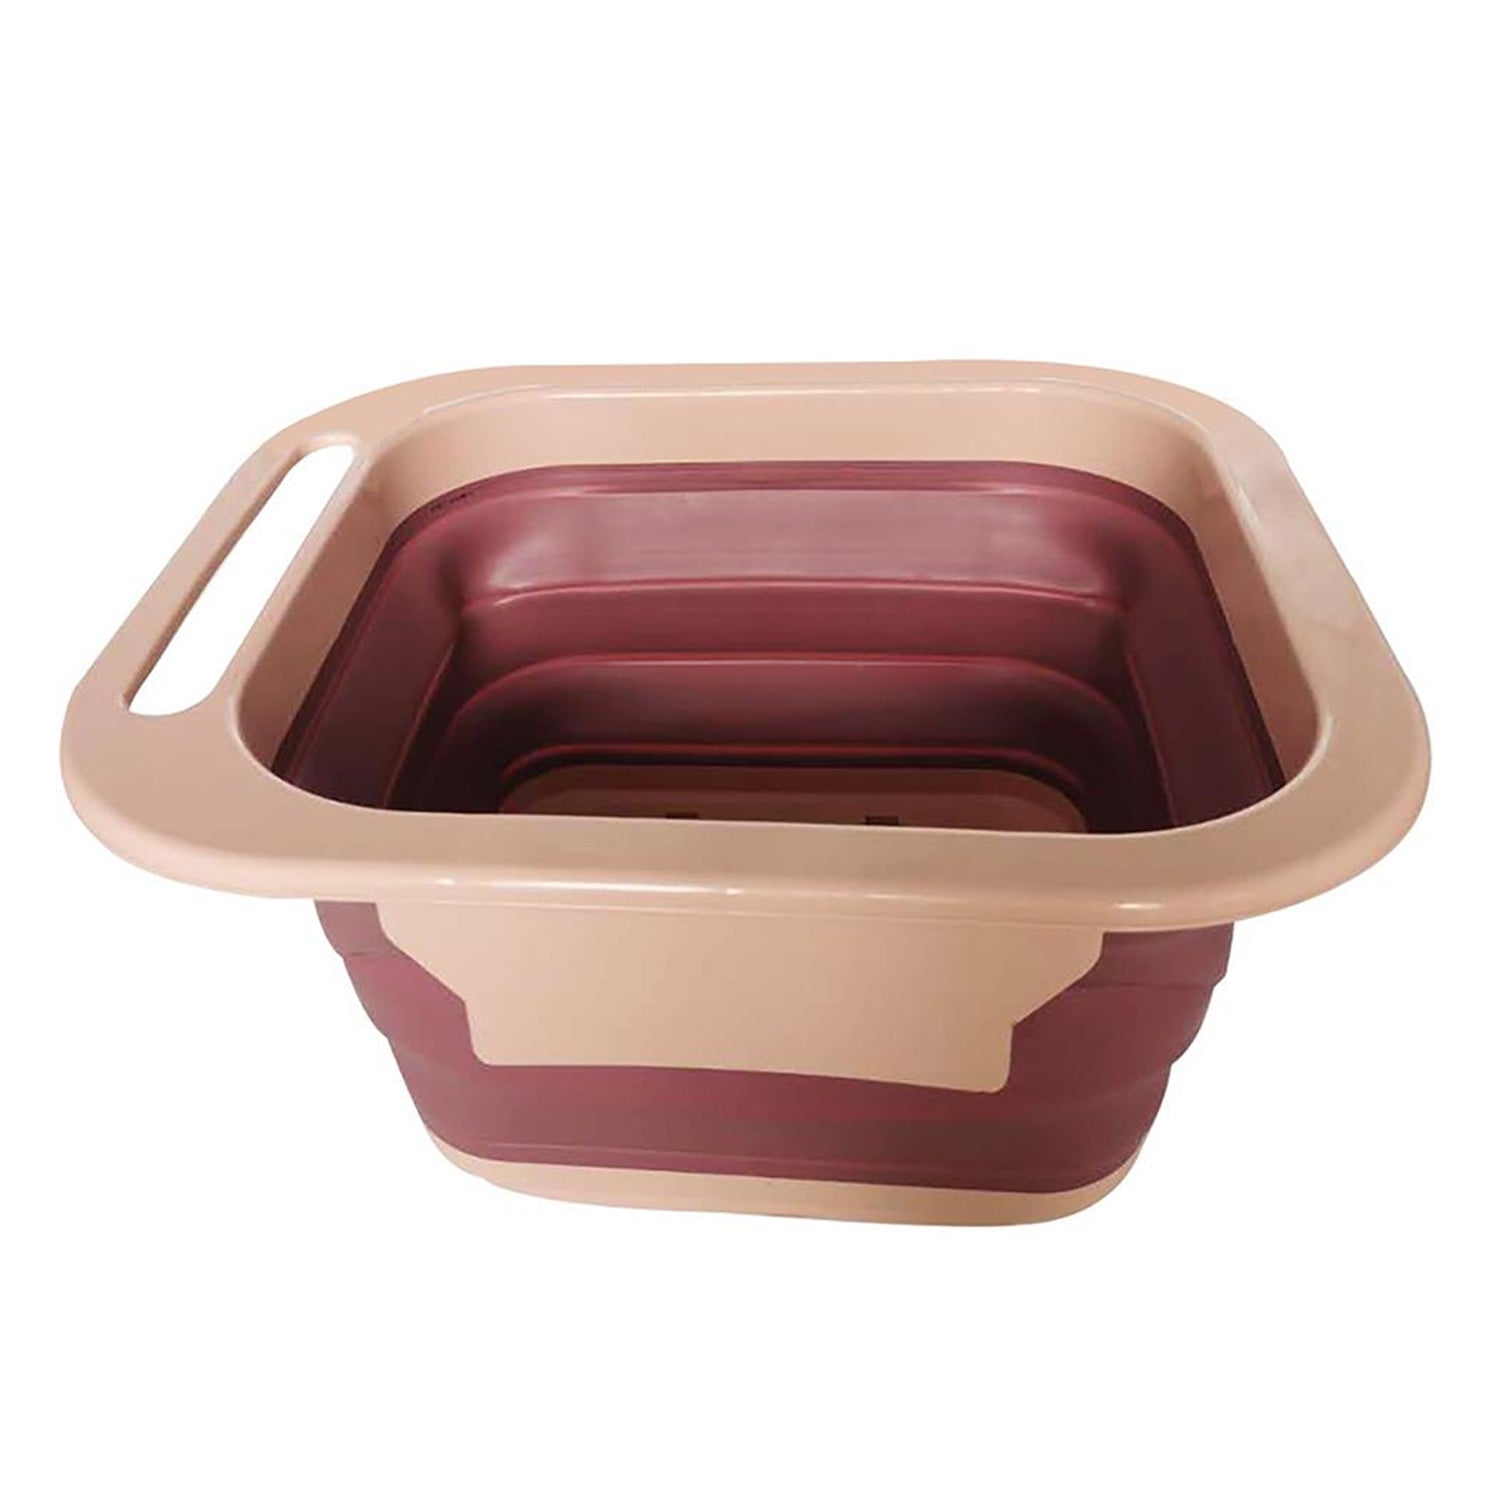 7389 Foldable Soaking Foot Massage Tub, Spa Basin, Bucket with Massage Roller, Suitable For Home Spa Pedicure Relieve Stress DeoDap